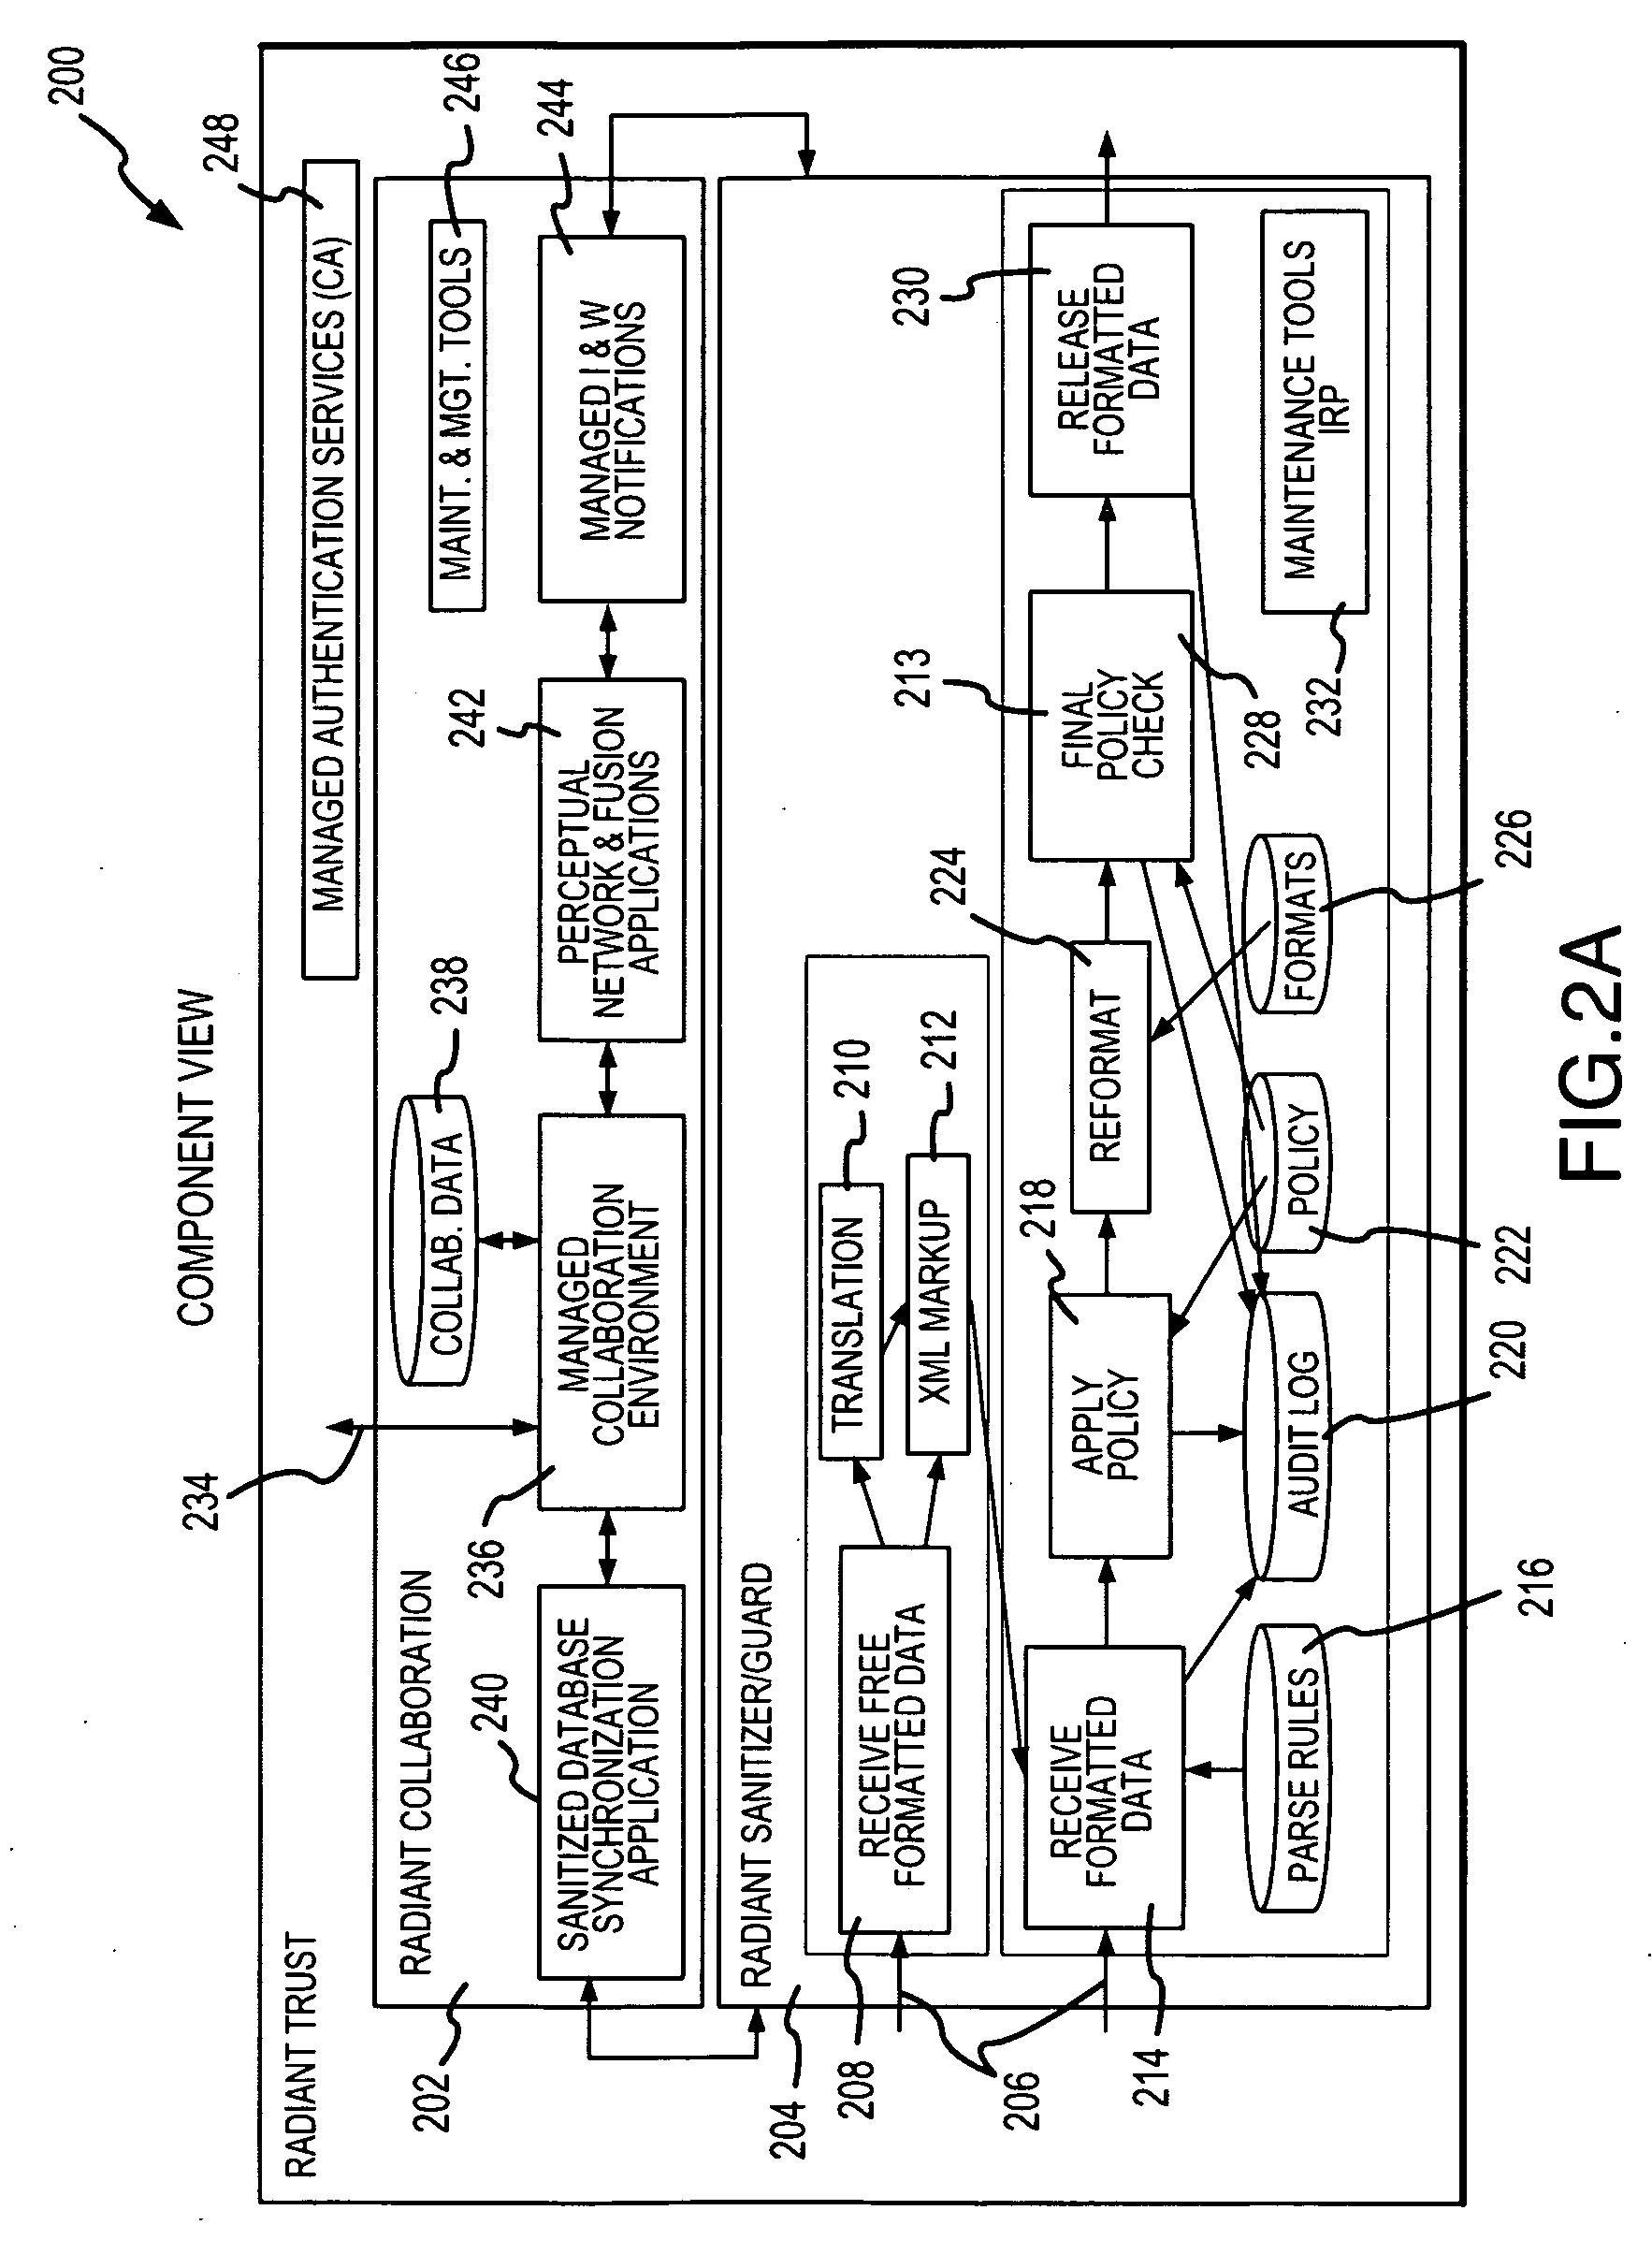 Information aggregation, processing and distribution system